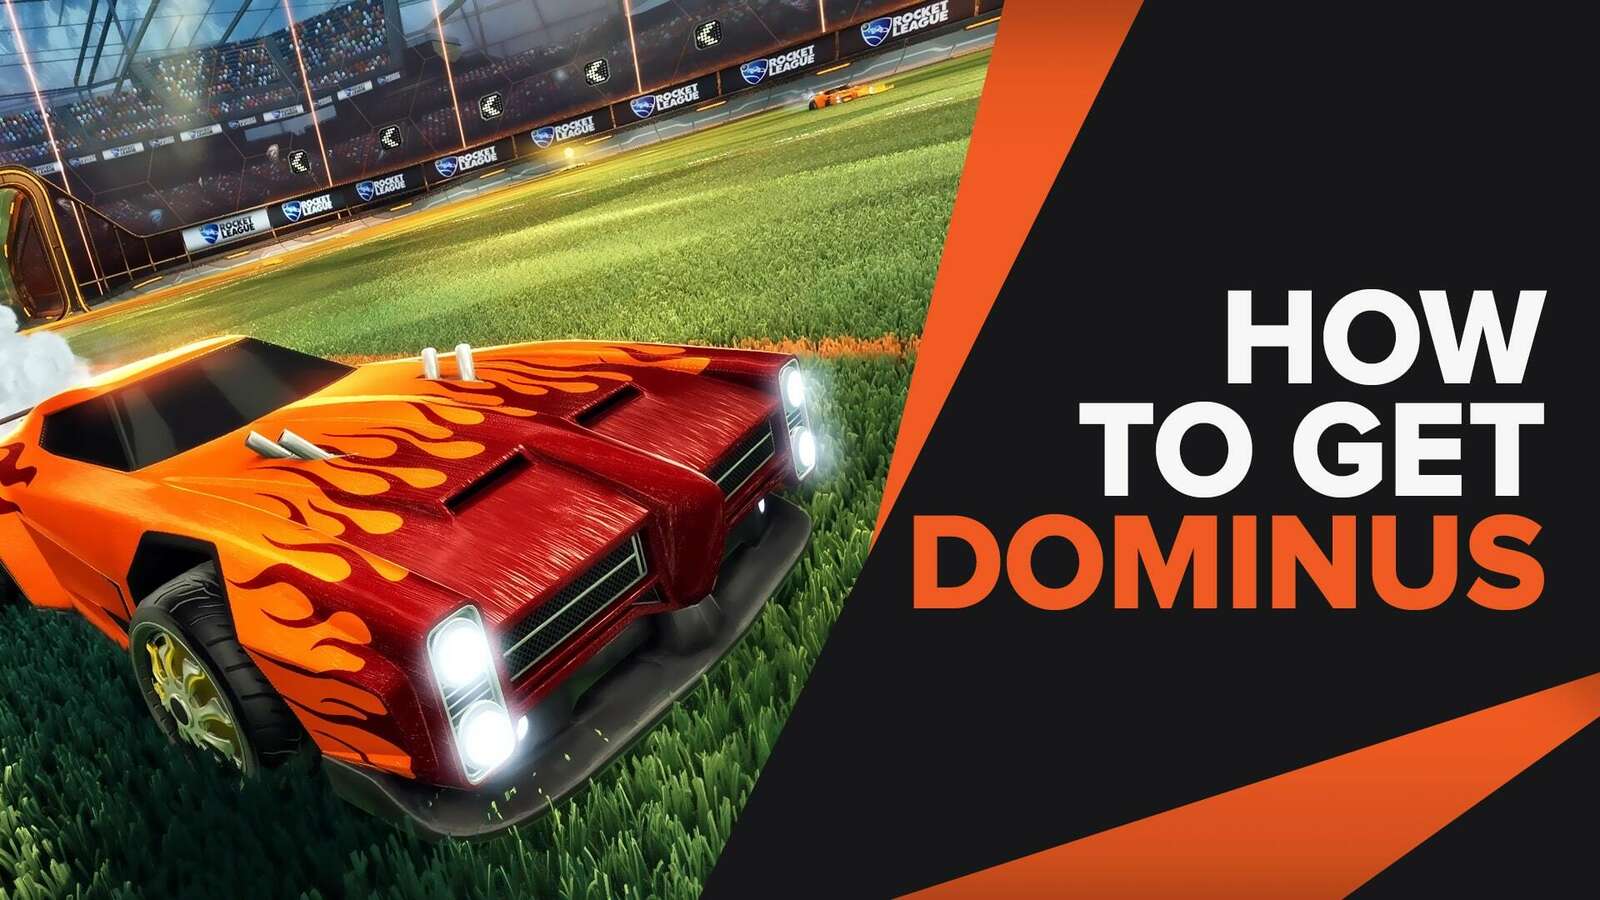 How to get the Titanium White Dominus in Rocket League